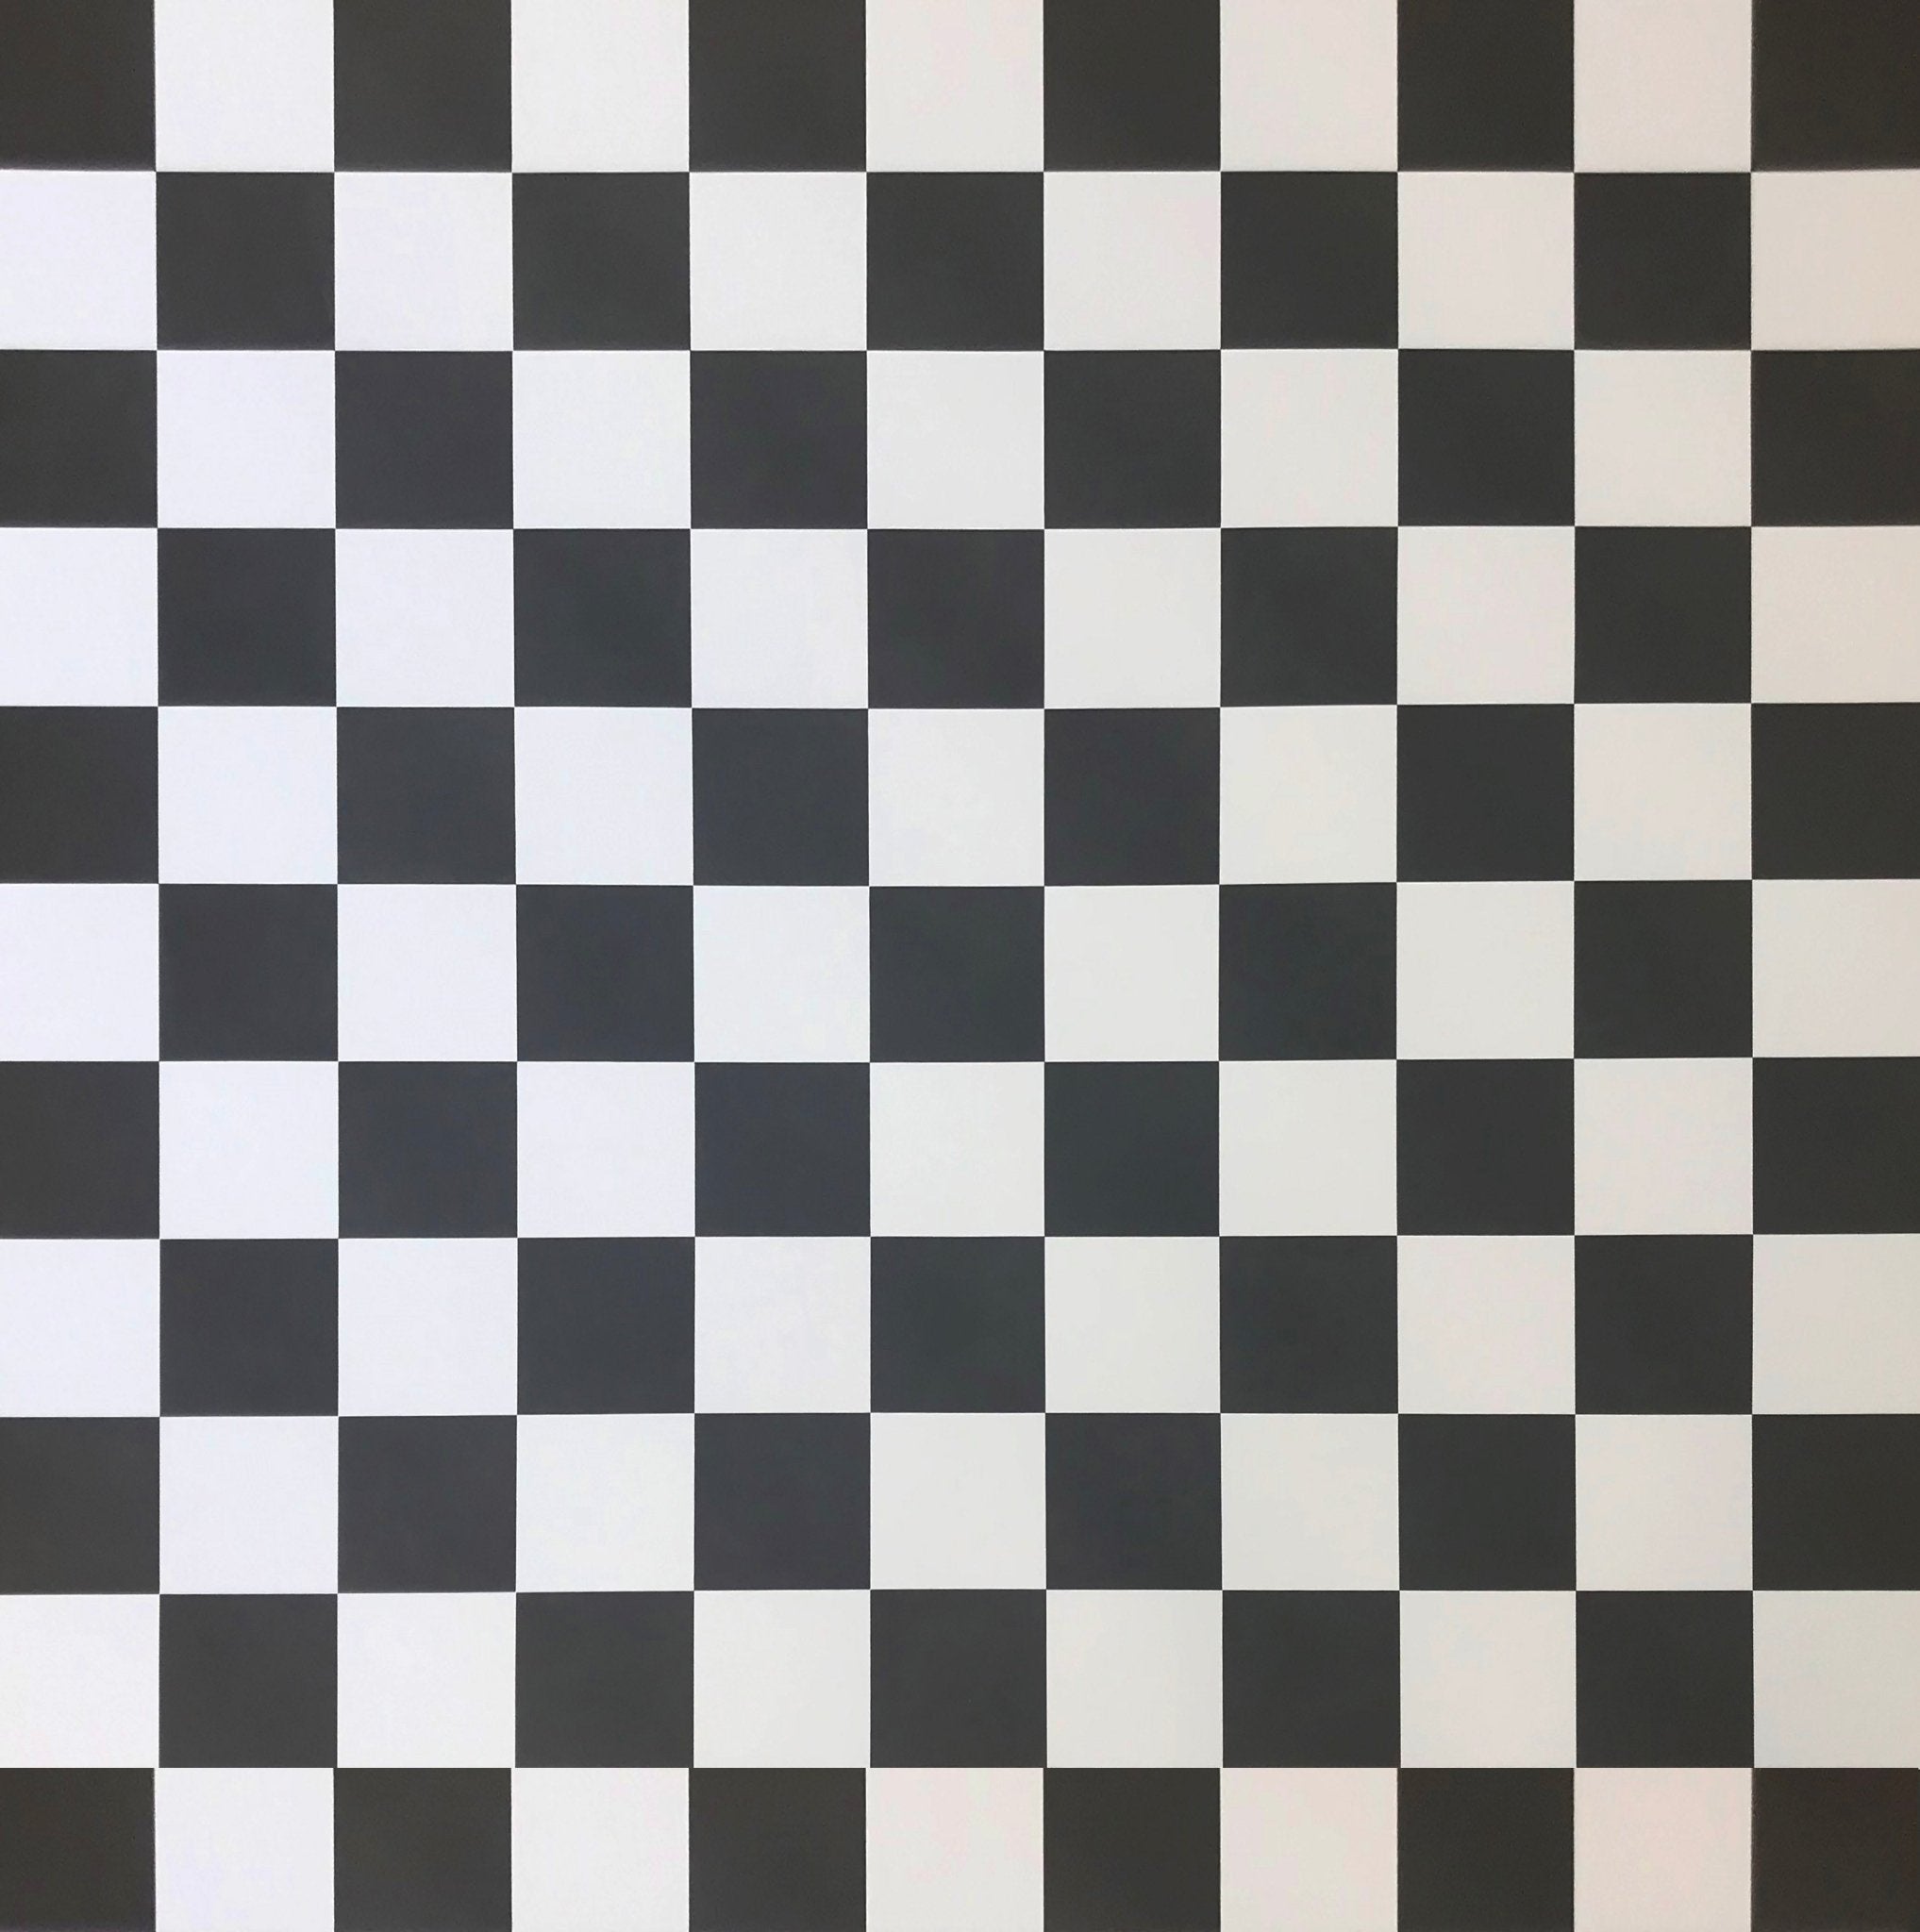 Full image of this black and white checkerboard floorcloth measuring 9.5' x 9.5'.